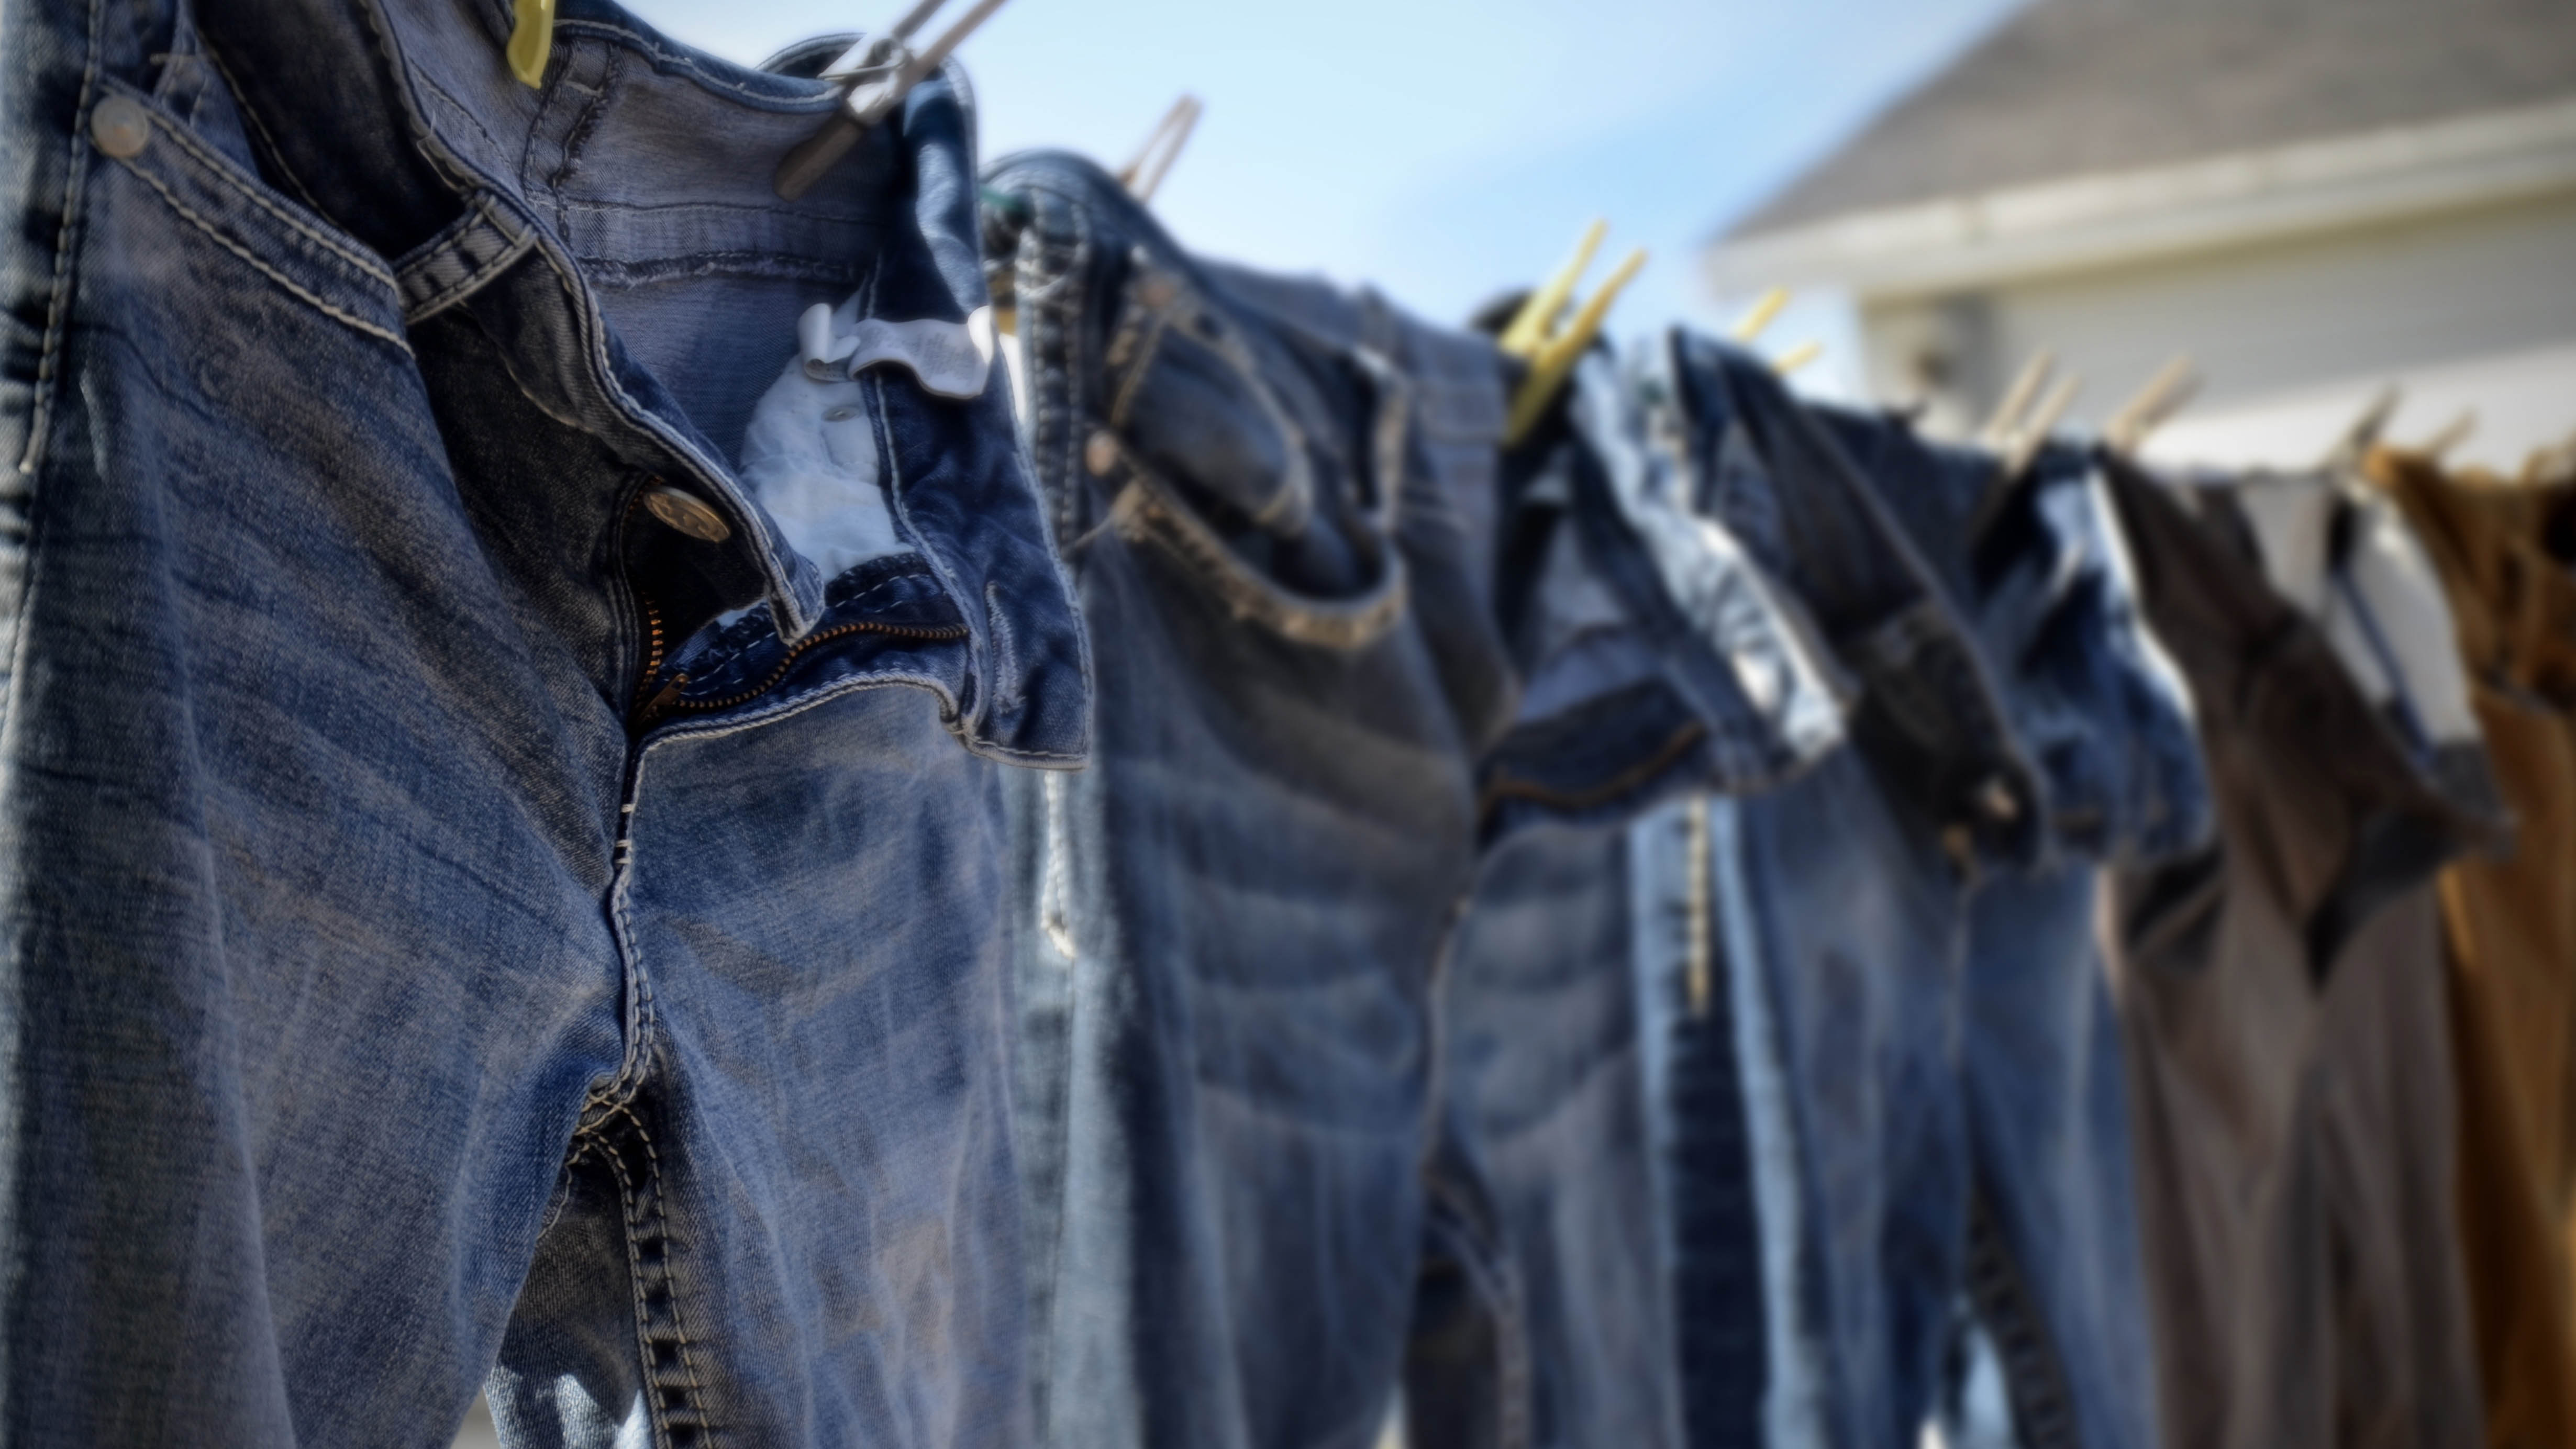 Jeans on the washing line